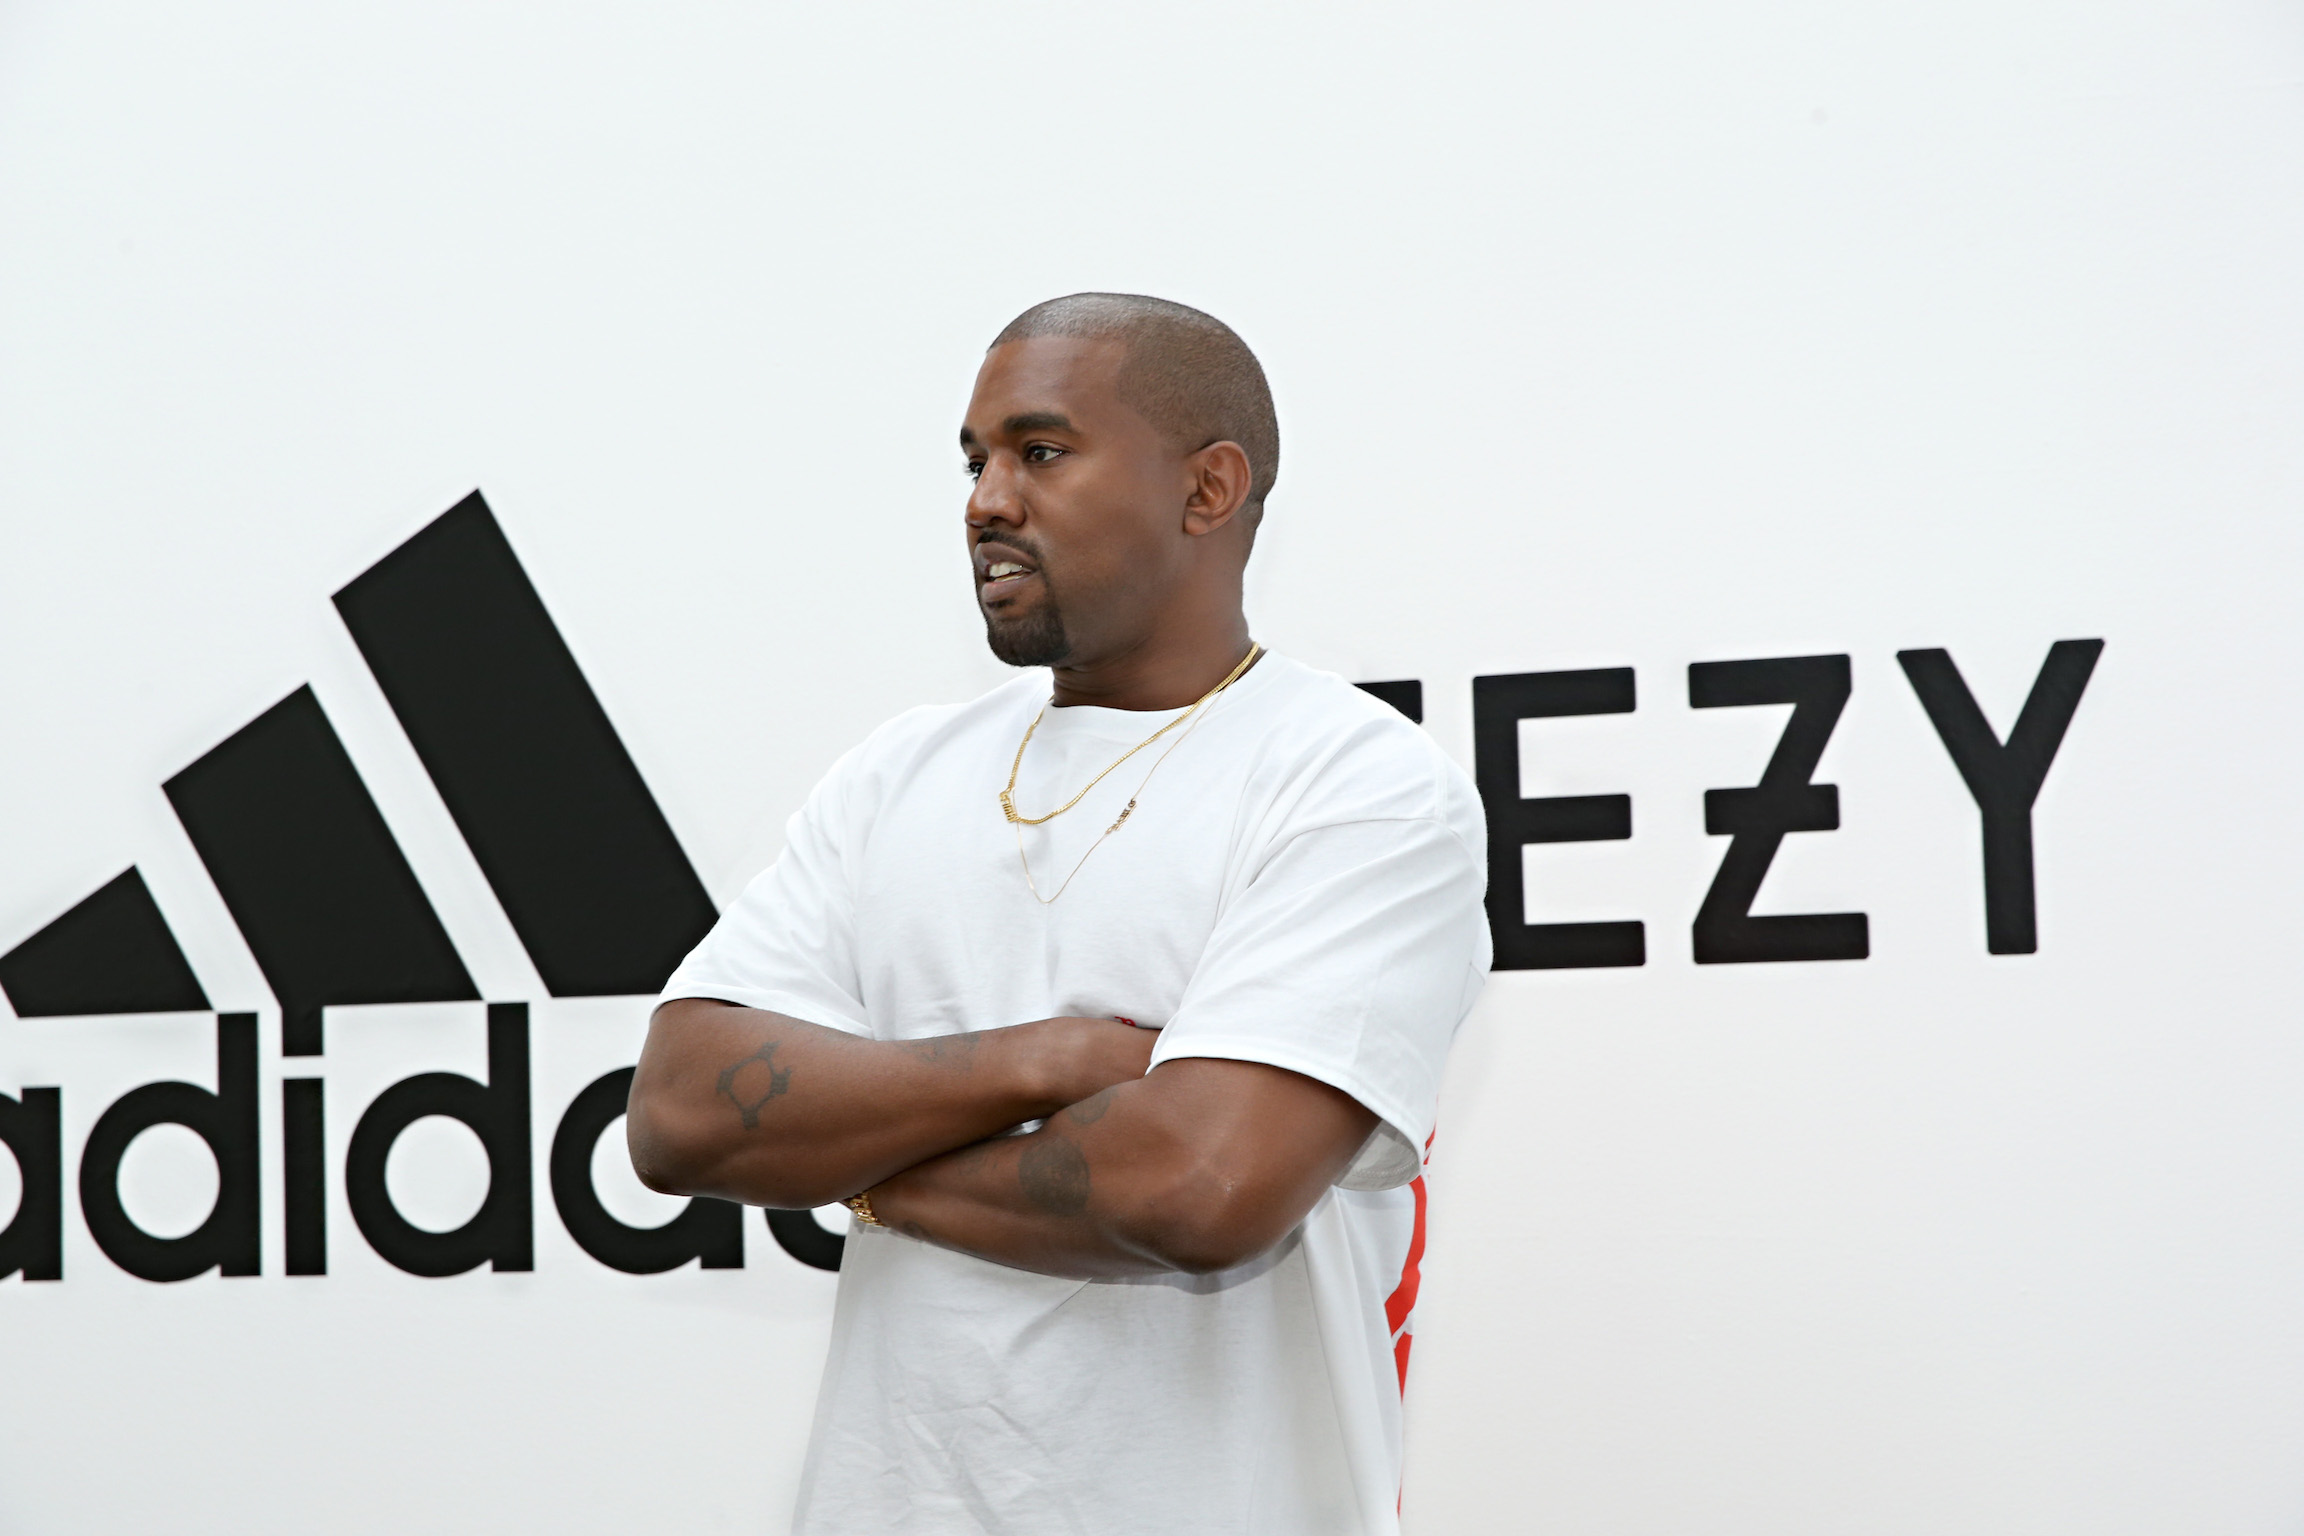 Kanye West at Milk Studios on June 28, 2016 in Hollywood, California. adidas and Kanye West announce the future of their partnership: adidas + KANYE WEST